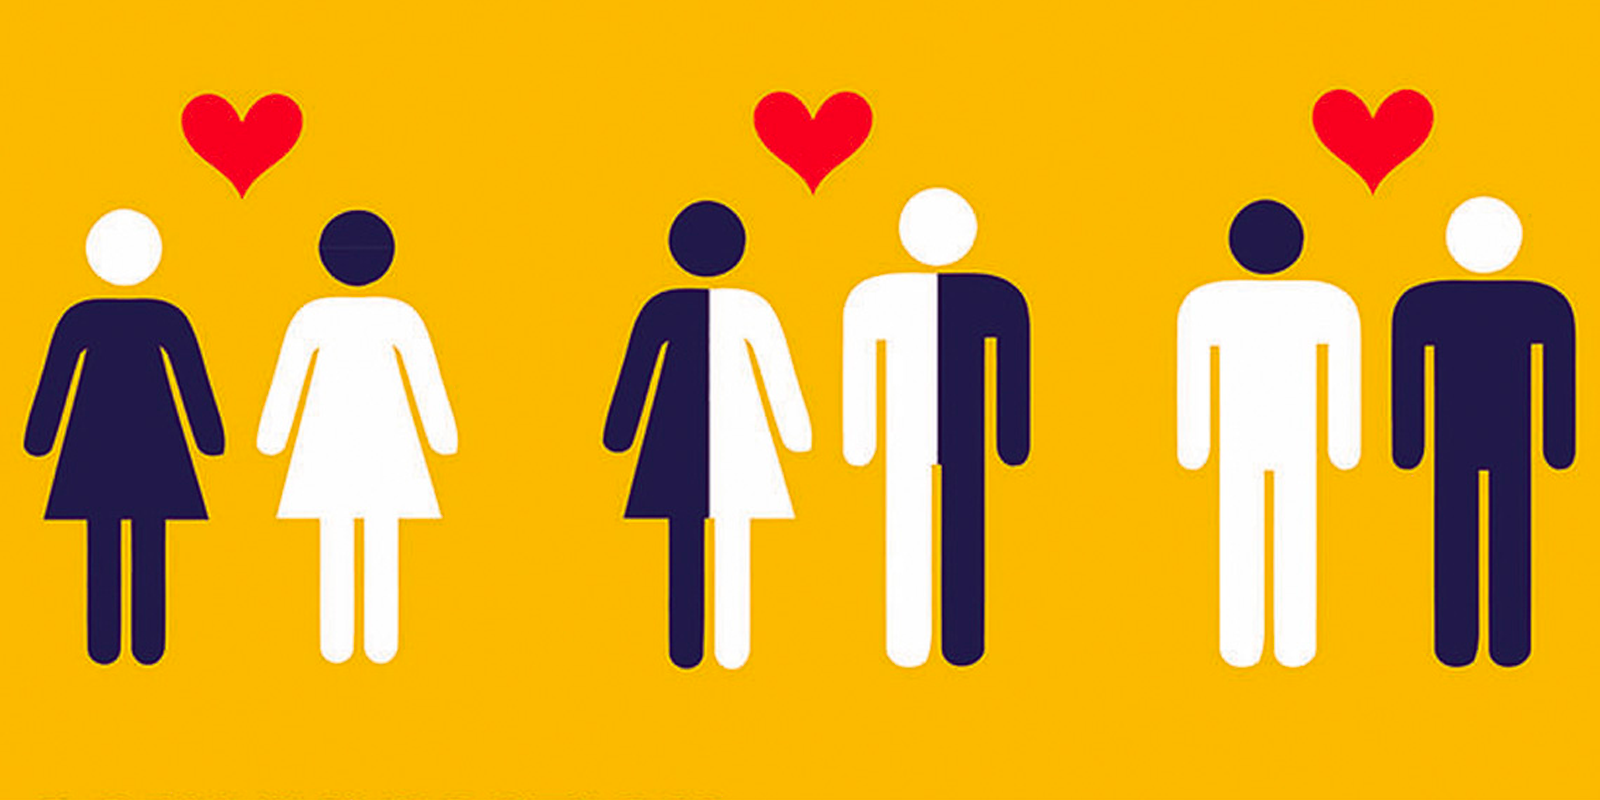 A graphic of different types of couples against a yellow background.